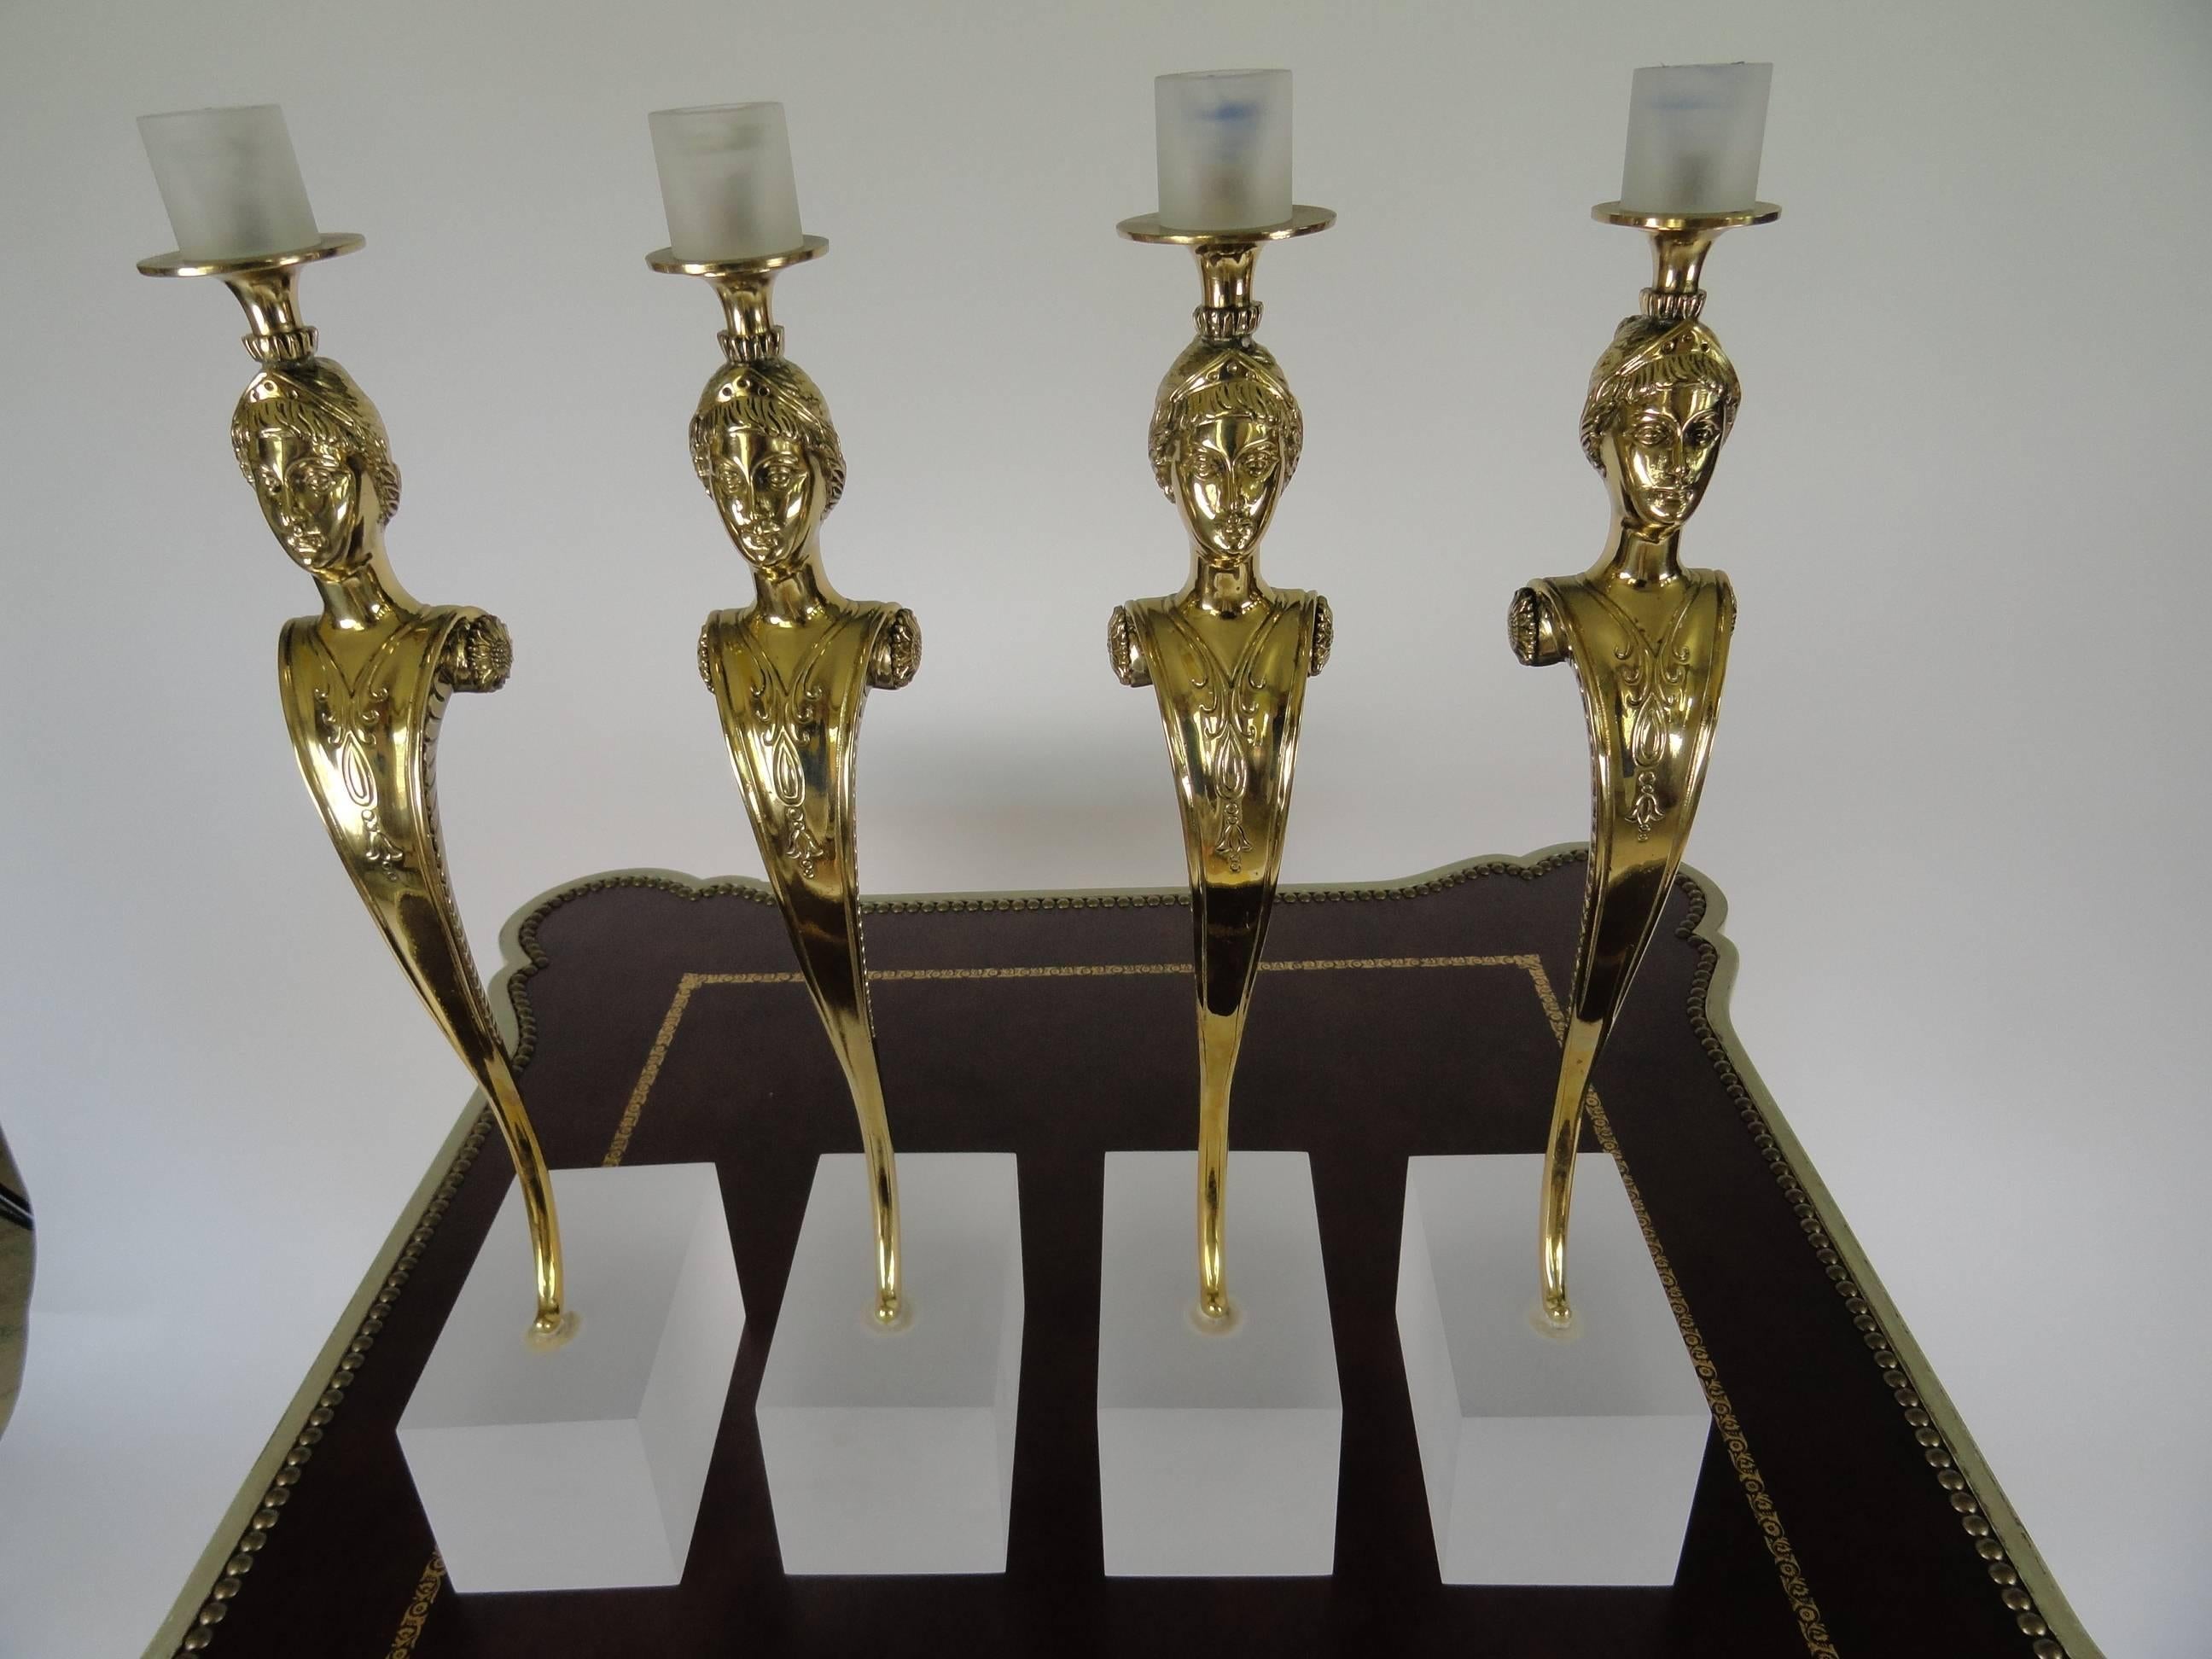 Set of four female figure Italian bronze candle holders featuring beautiful details.  Carved breast-plate detail mounted on sand-blasted acrylic bases.  Candleholders are designed to hold up to 36